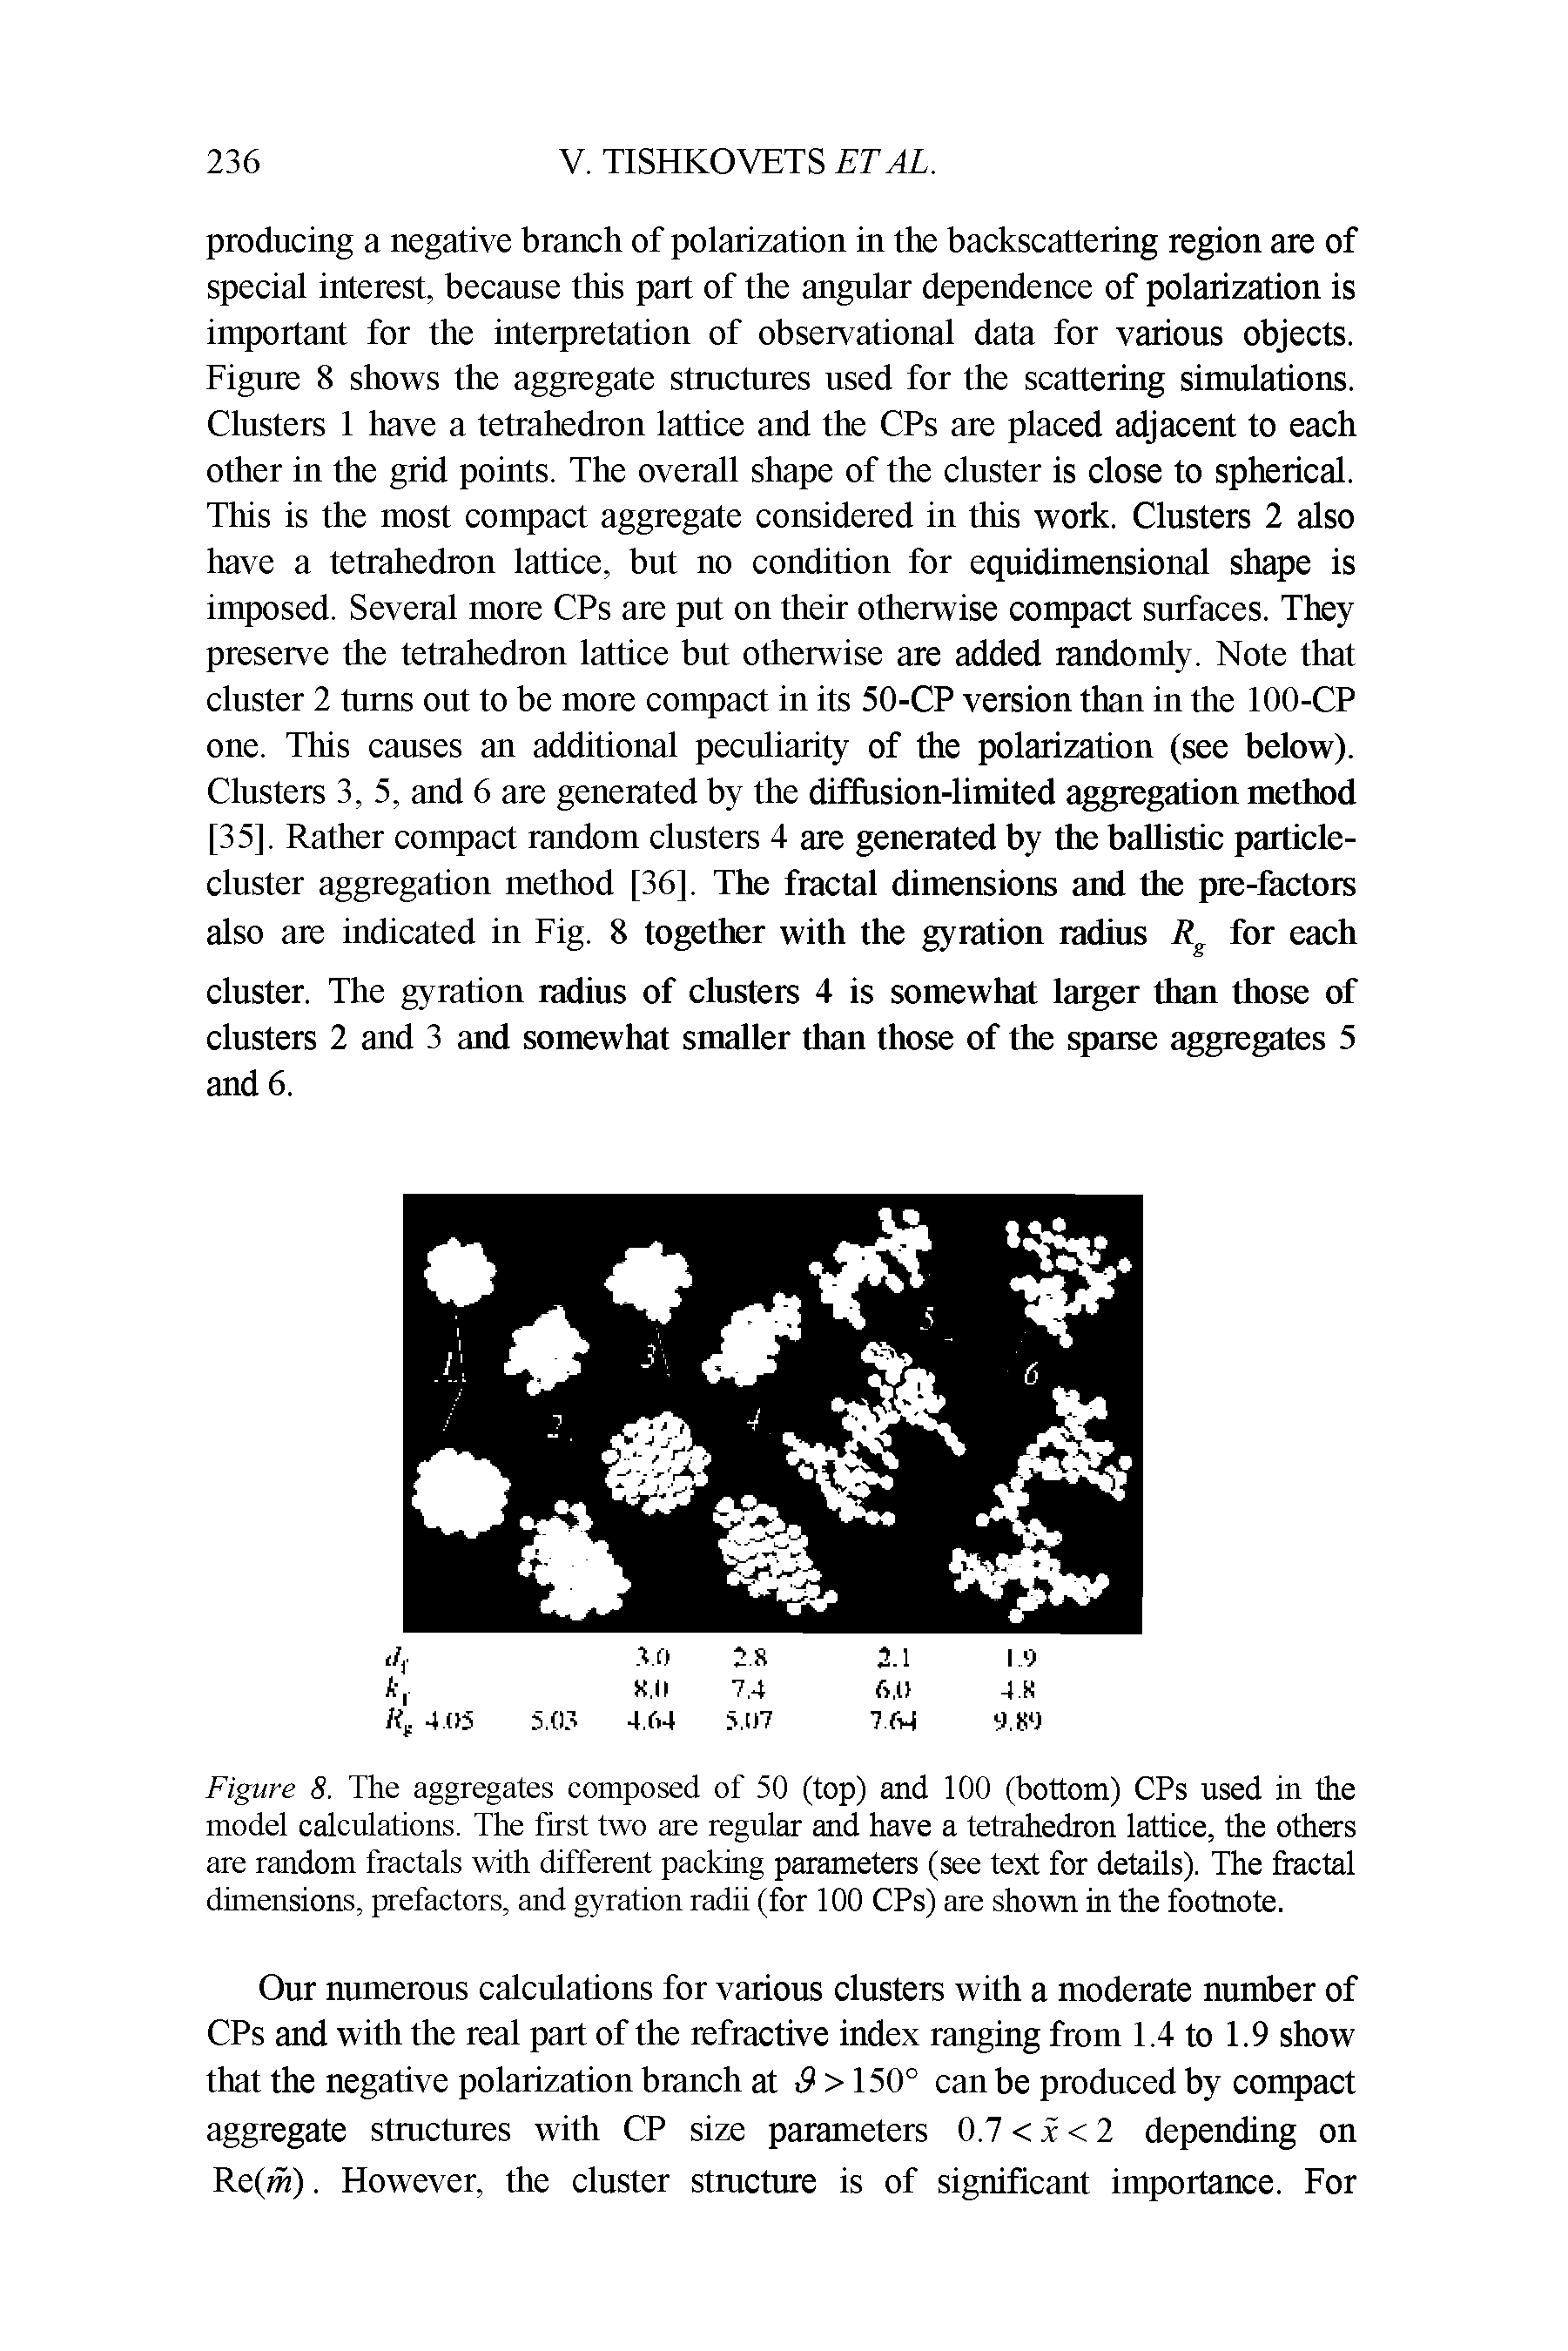 Figure 8. The aggregates composed of 50 (top) and 100 (bottom) CPs used in the model calculations. The first two are regular and have a tetrahedron lattice, the others are random fractals with different packing parameters (see text for details). The fractal dimensions, prefactors, and gyration radii (for 100 CPs) are shown in the footnote.